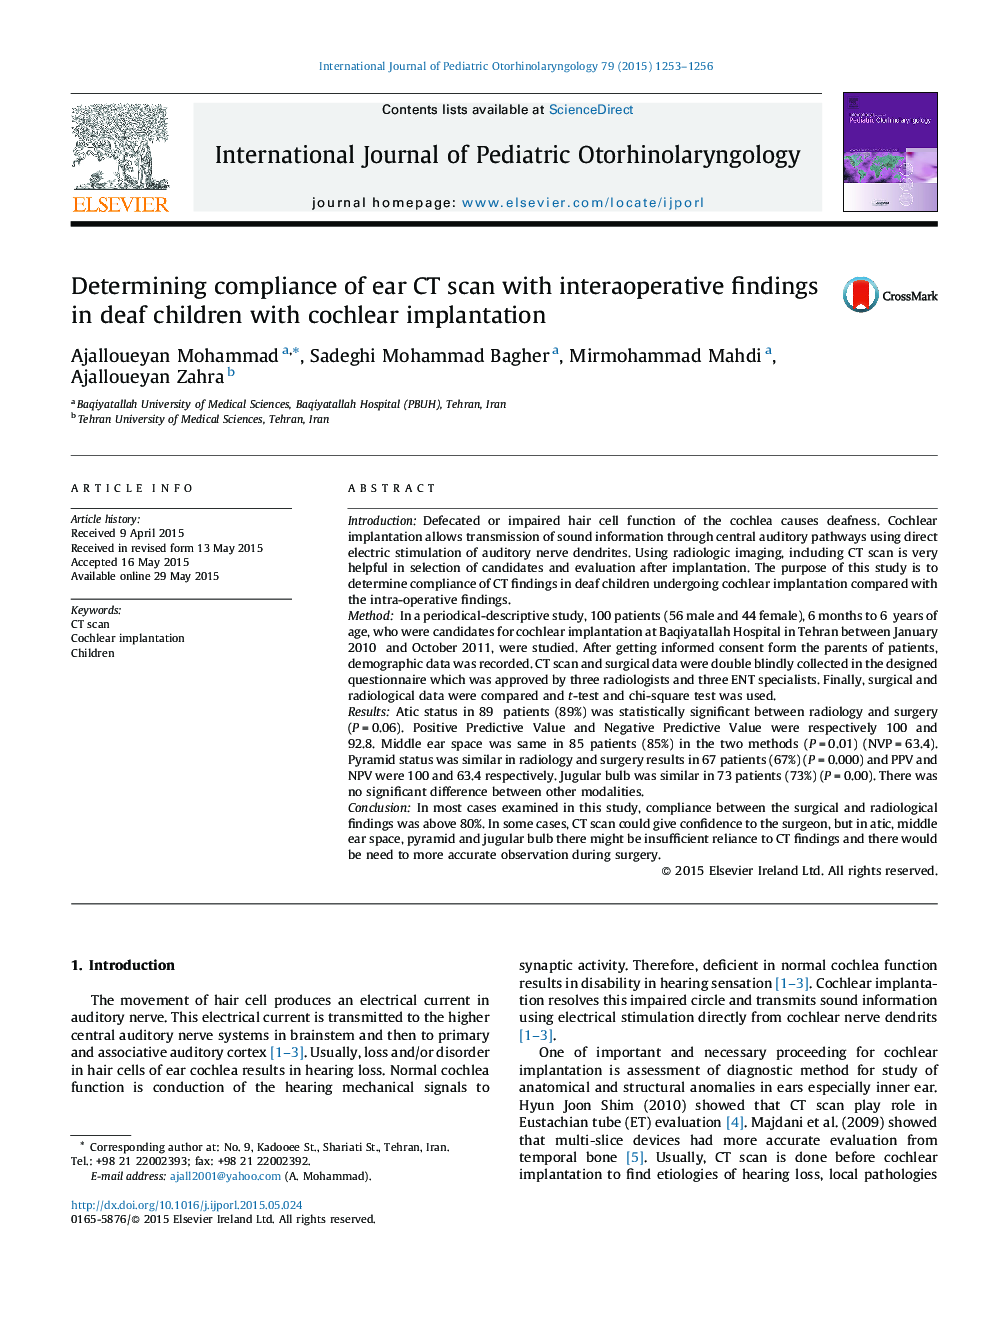 Determining compliance of ear CT scan with interaoperative findings in deaf children with cochlear implantation